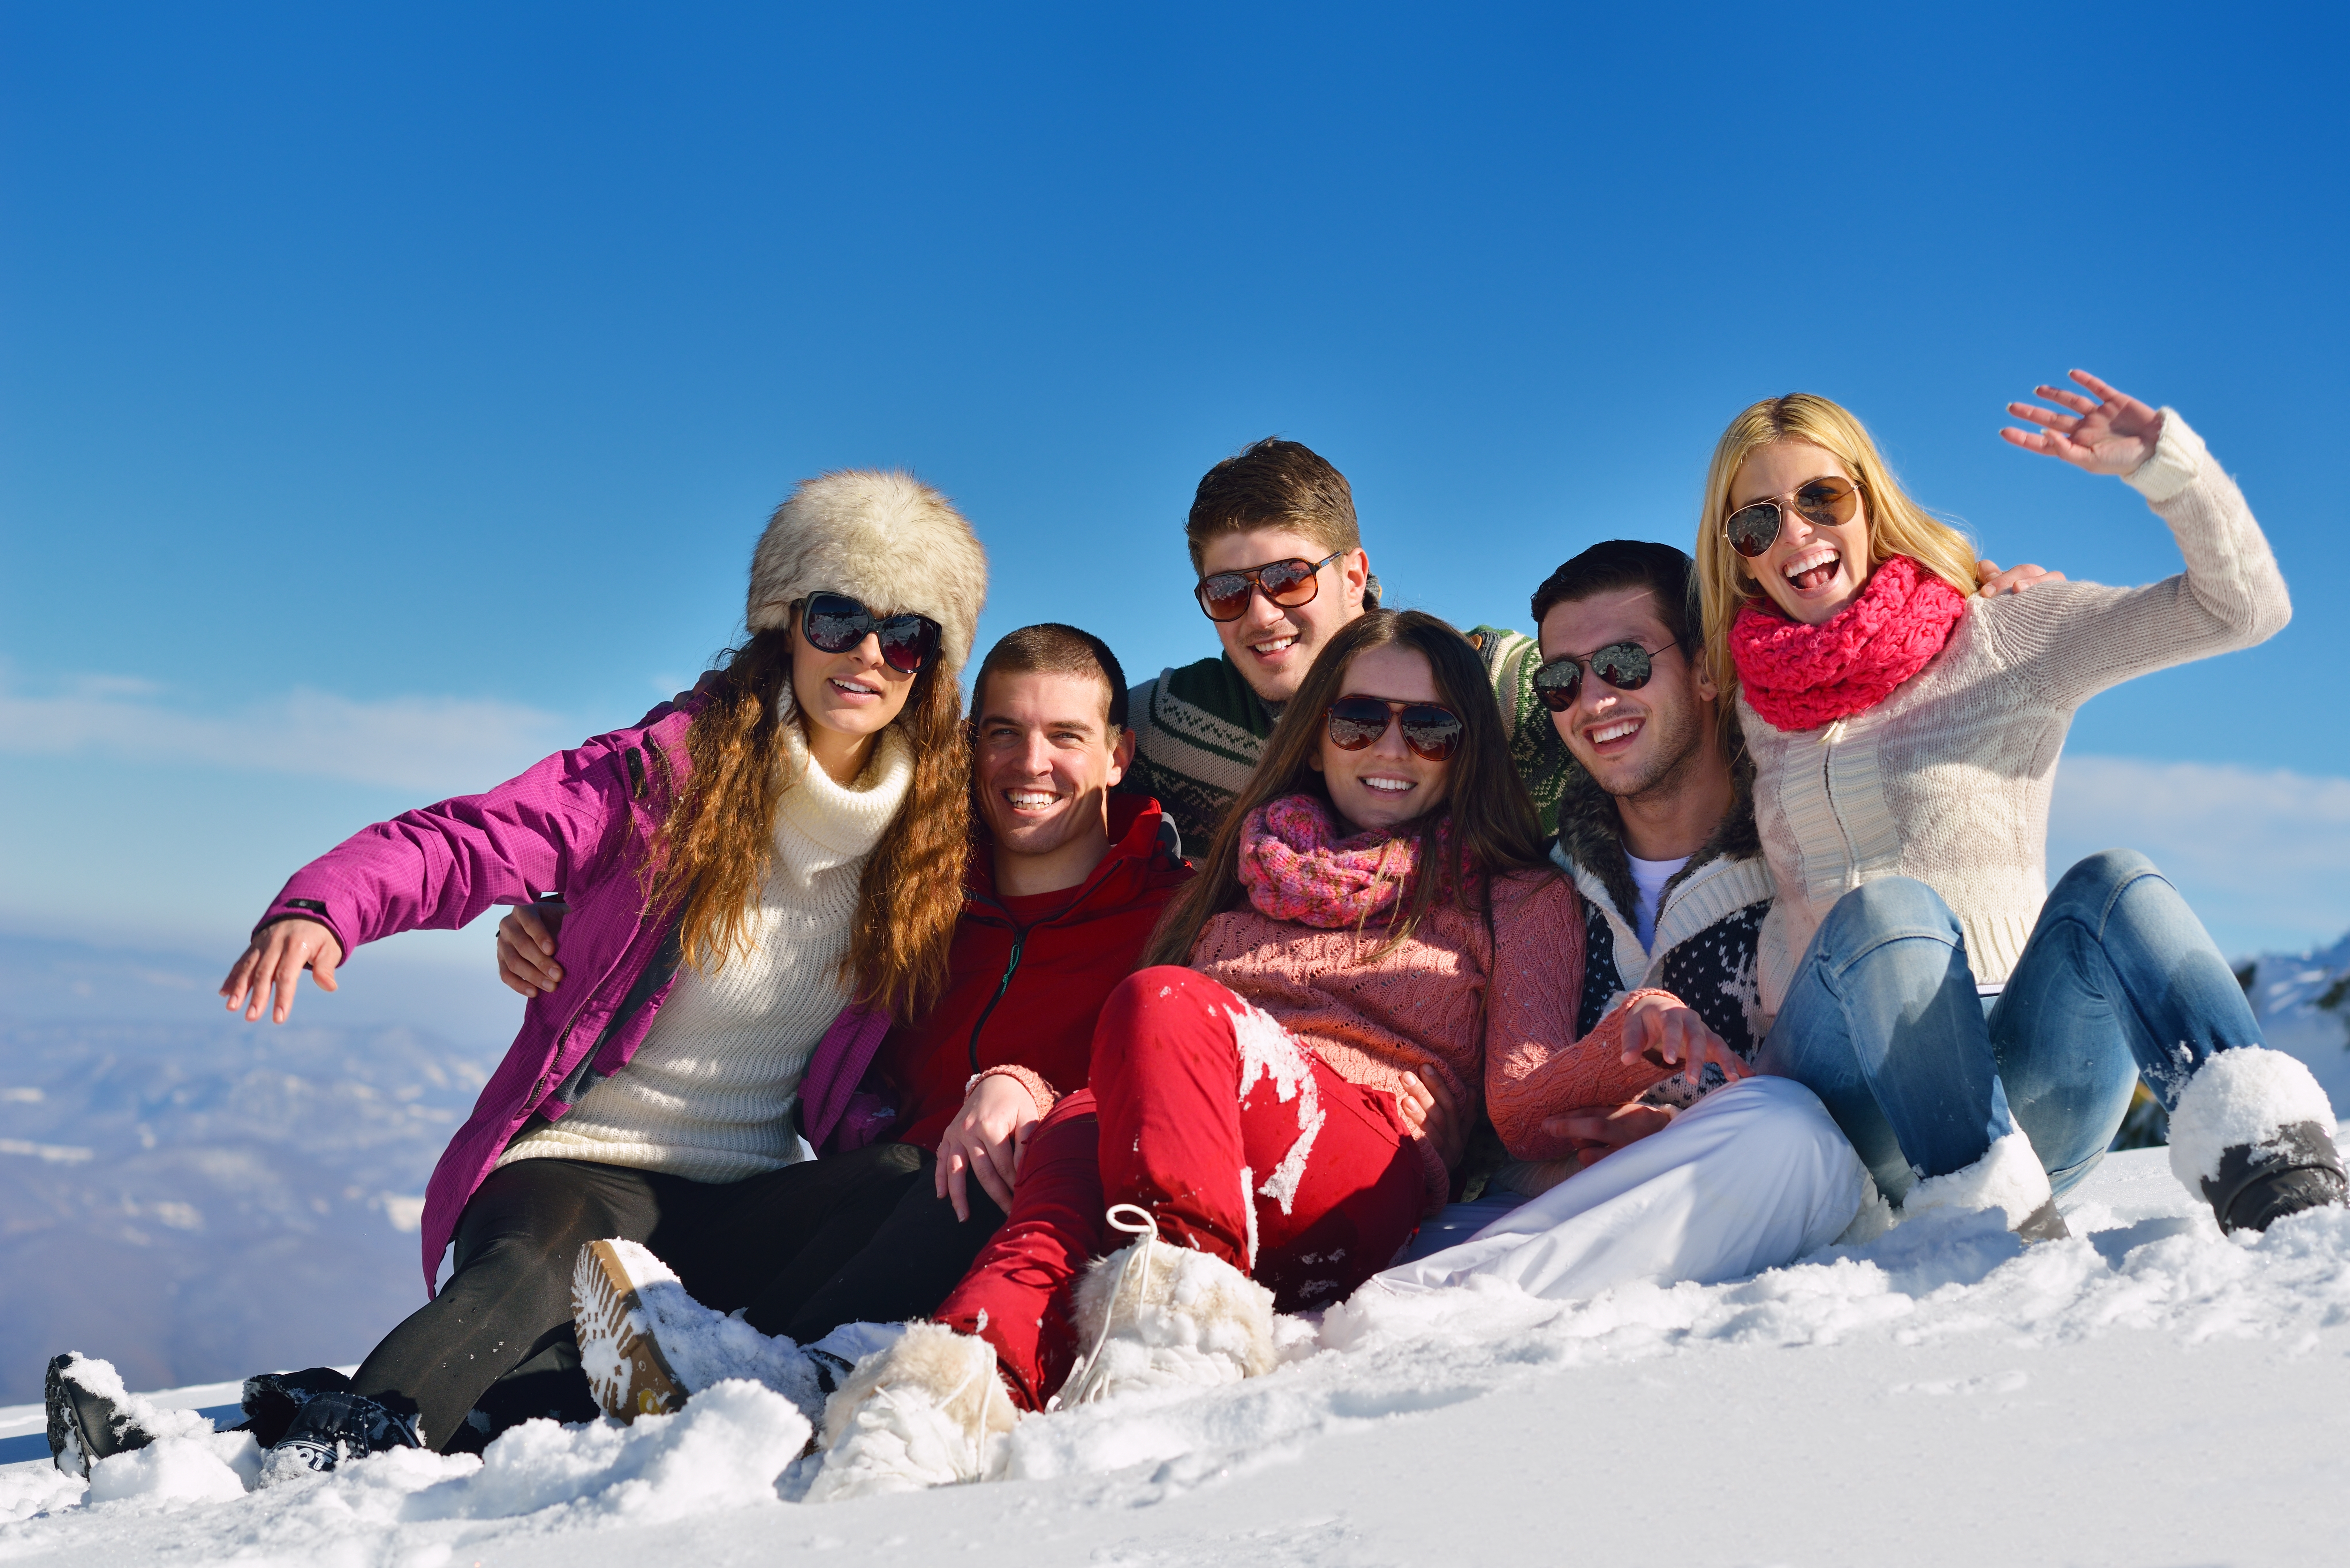 happy young people group have fun and enjoy fresh snow at beautiful wi